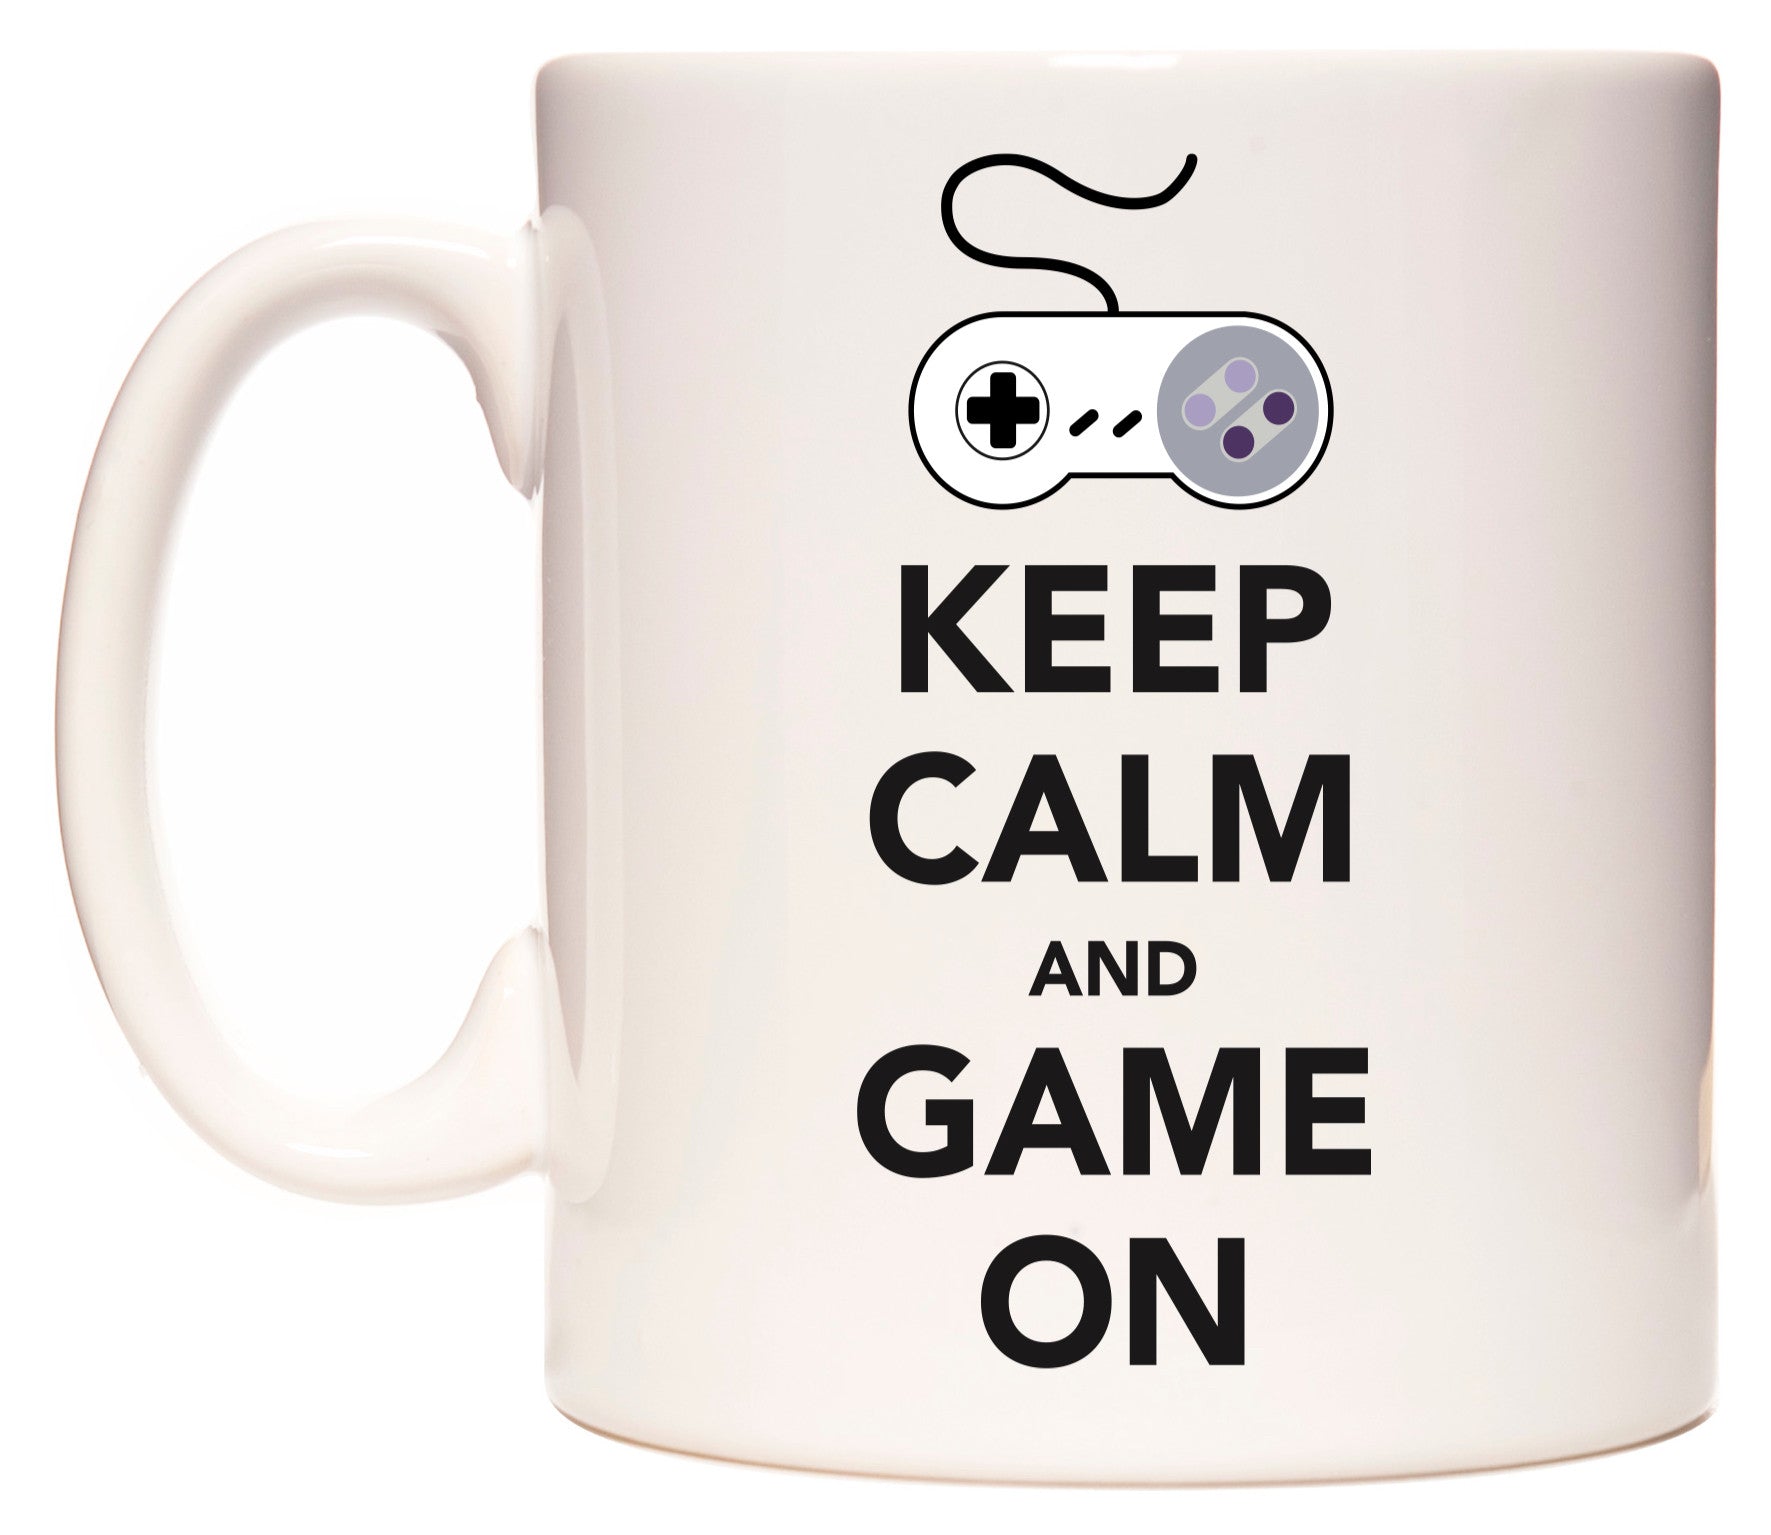 This mug features KEEP CALM AND GAME ON